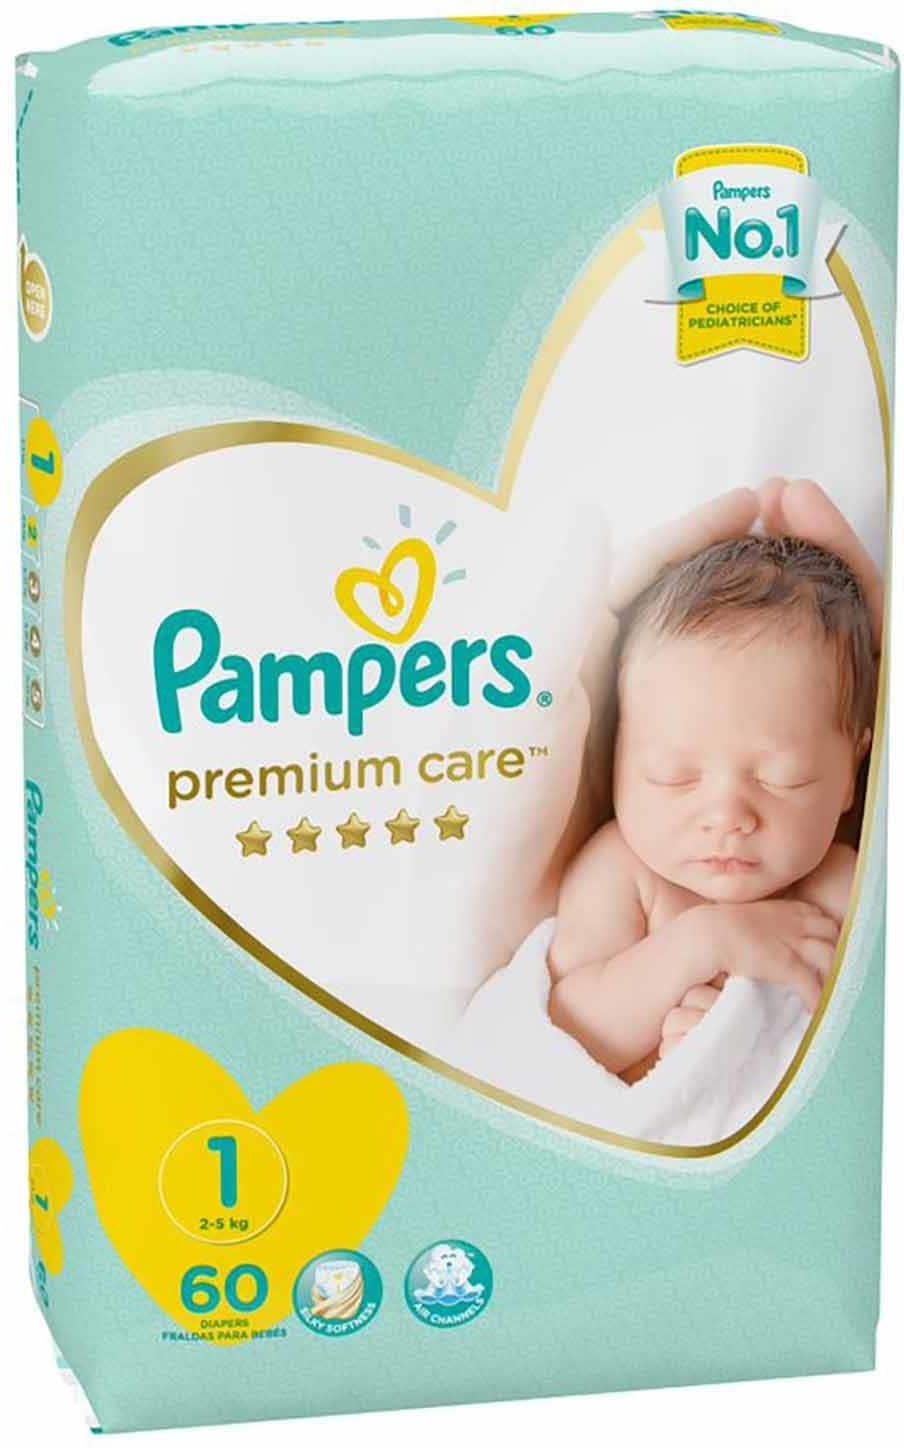 Pampers Premium Care Diapers - Size 1 - Newborn - 2-5 Kg - 60 Diapers